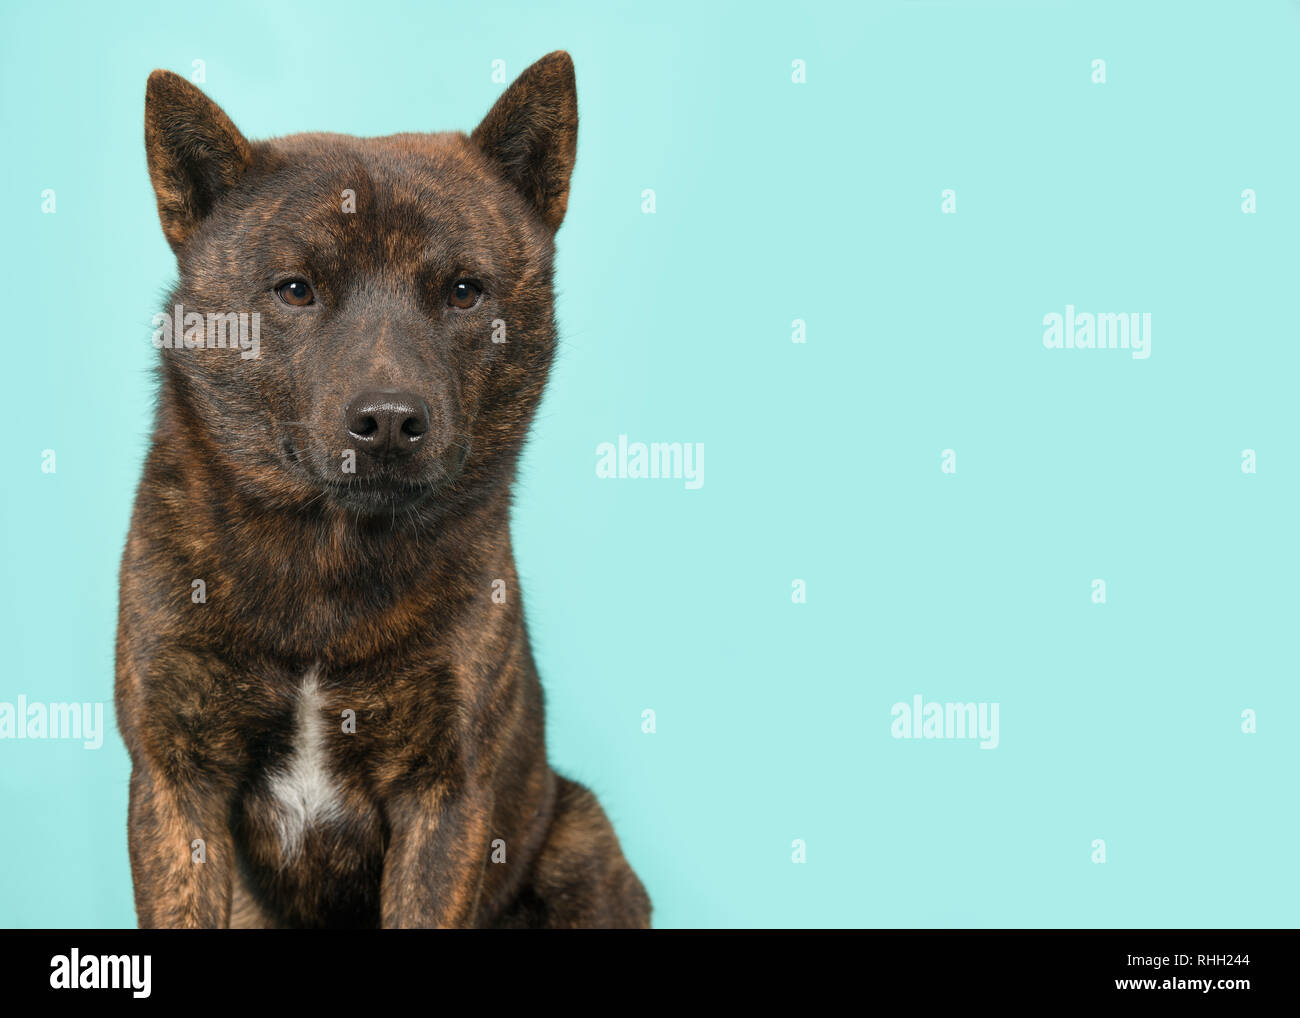 Portrait Of A Proud Male Kai Ken Dog The National Japanese Breed Looking At The Camera On A Blue Background Stock Photo Alamy